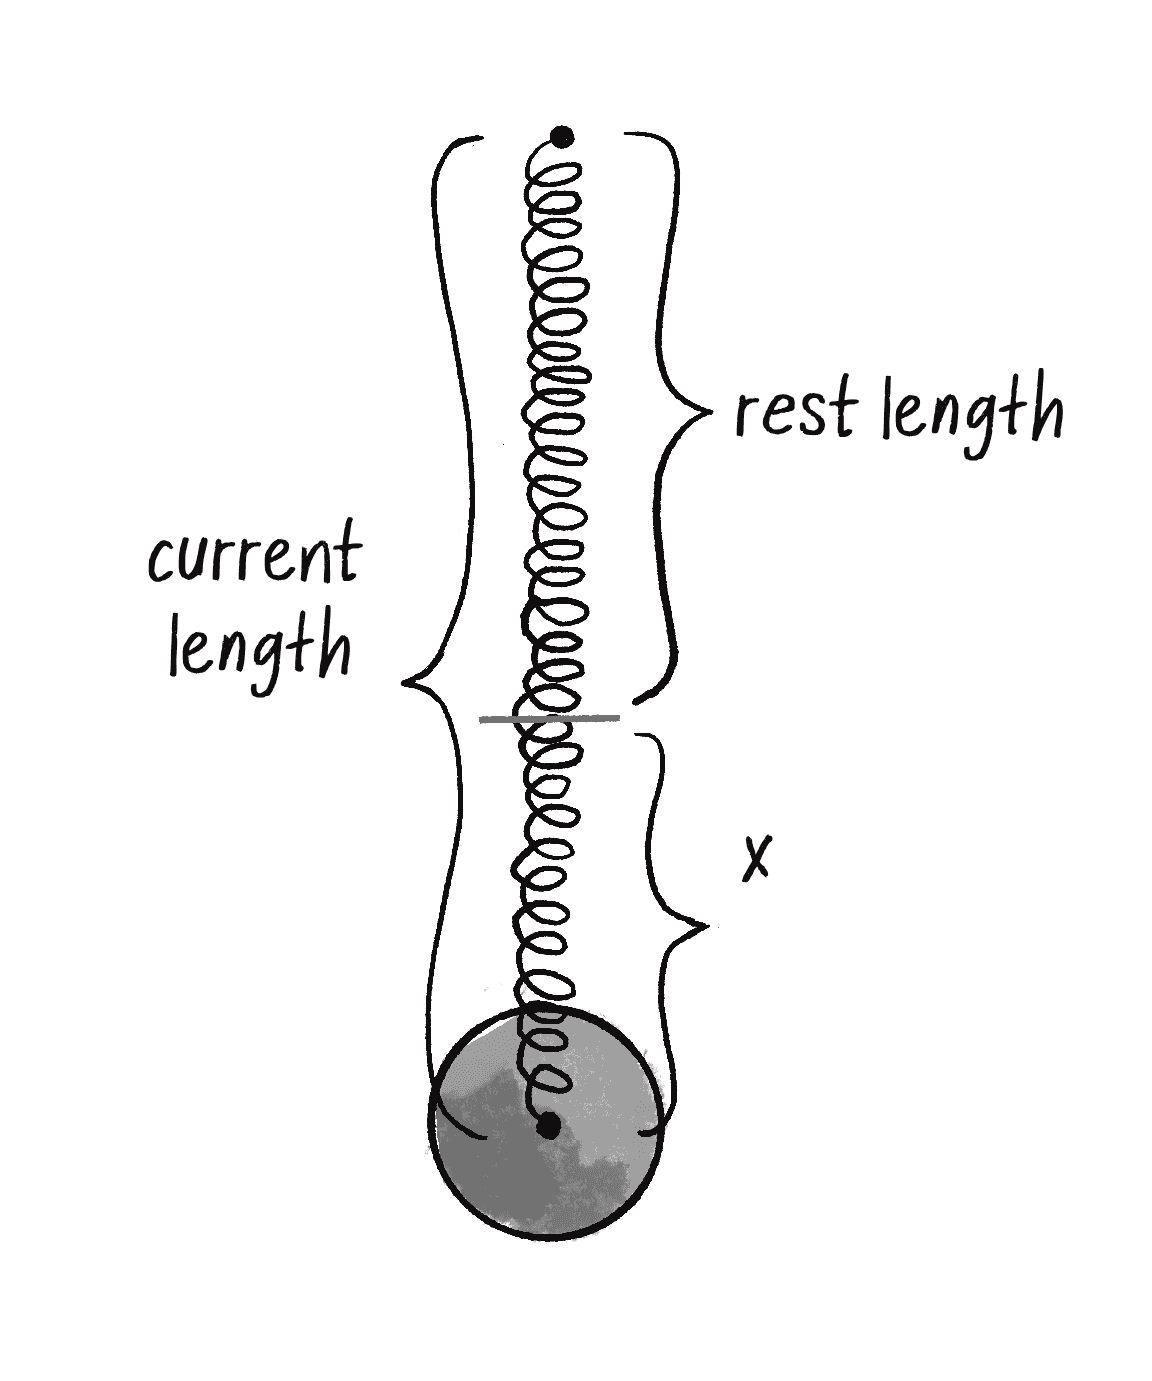 Figure 3.12: A spring’s extension (x) is the difference between its current length and its rest length.